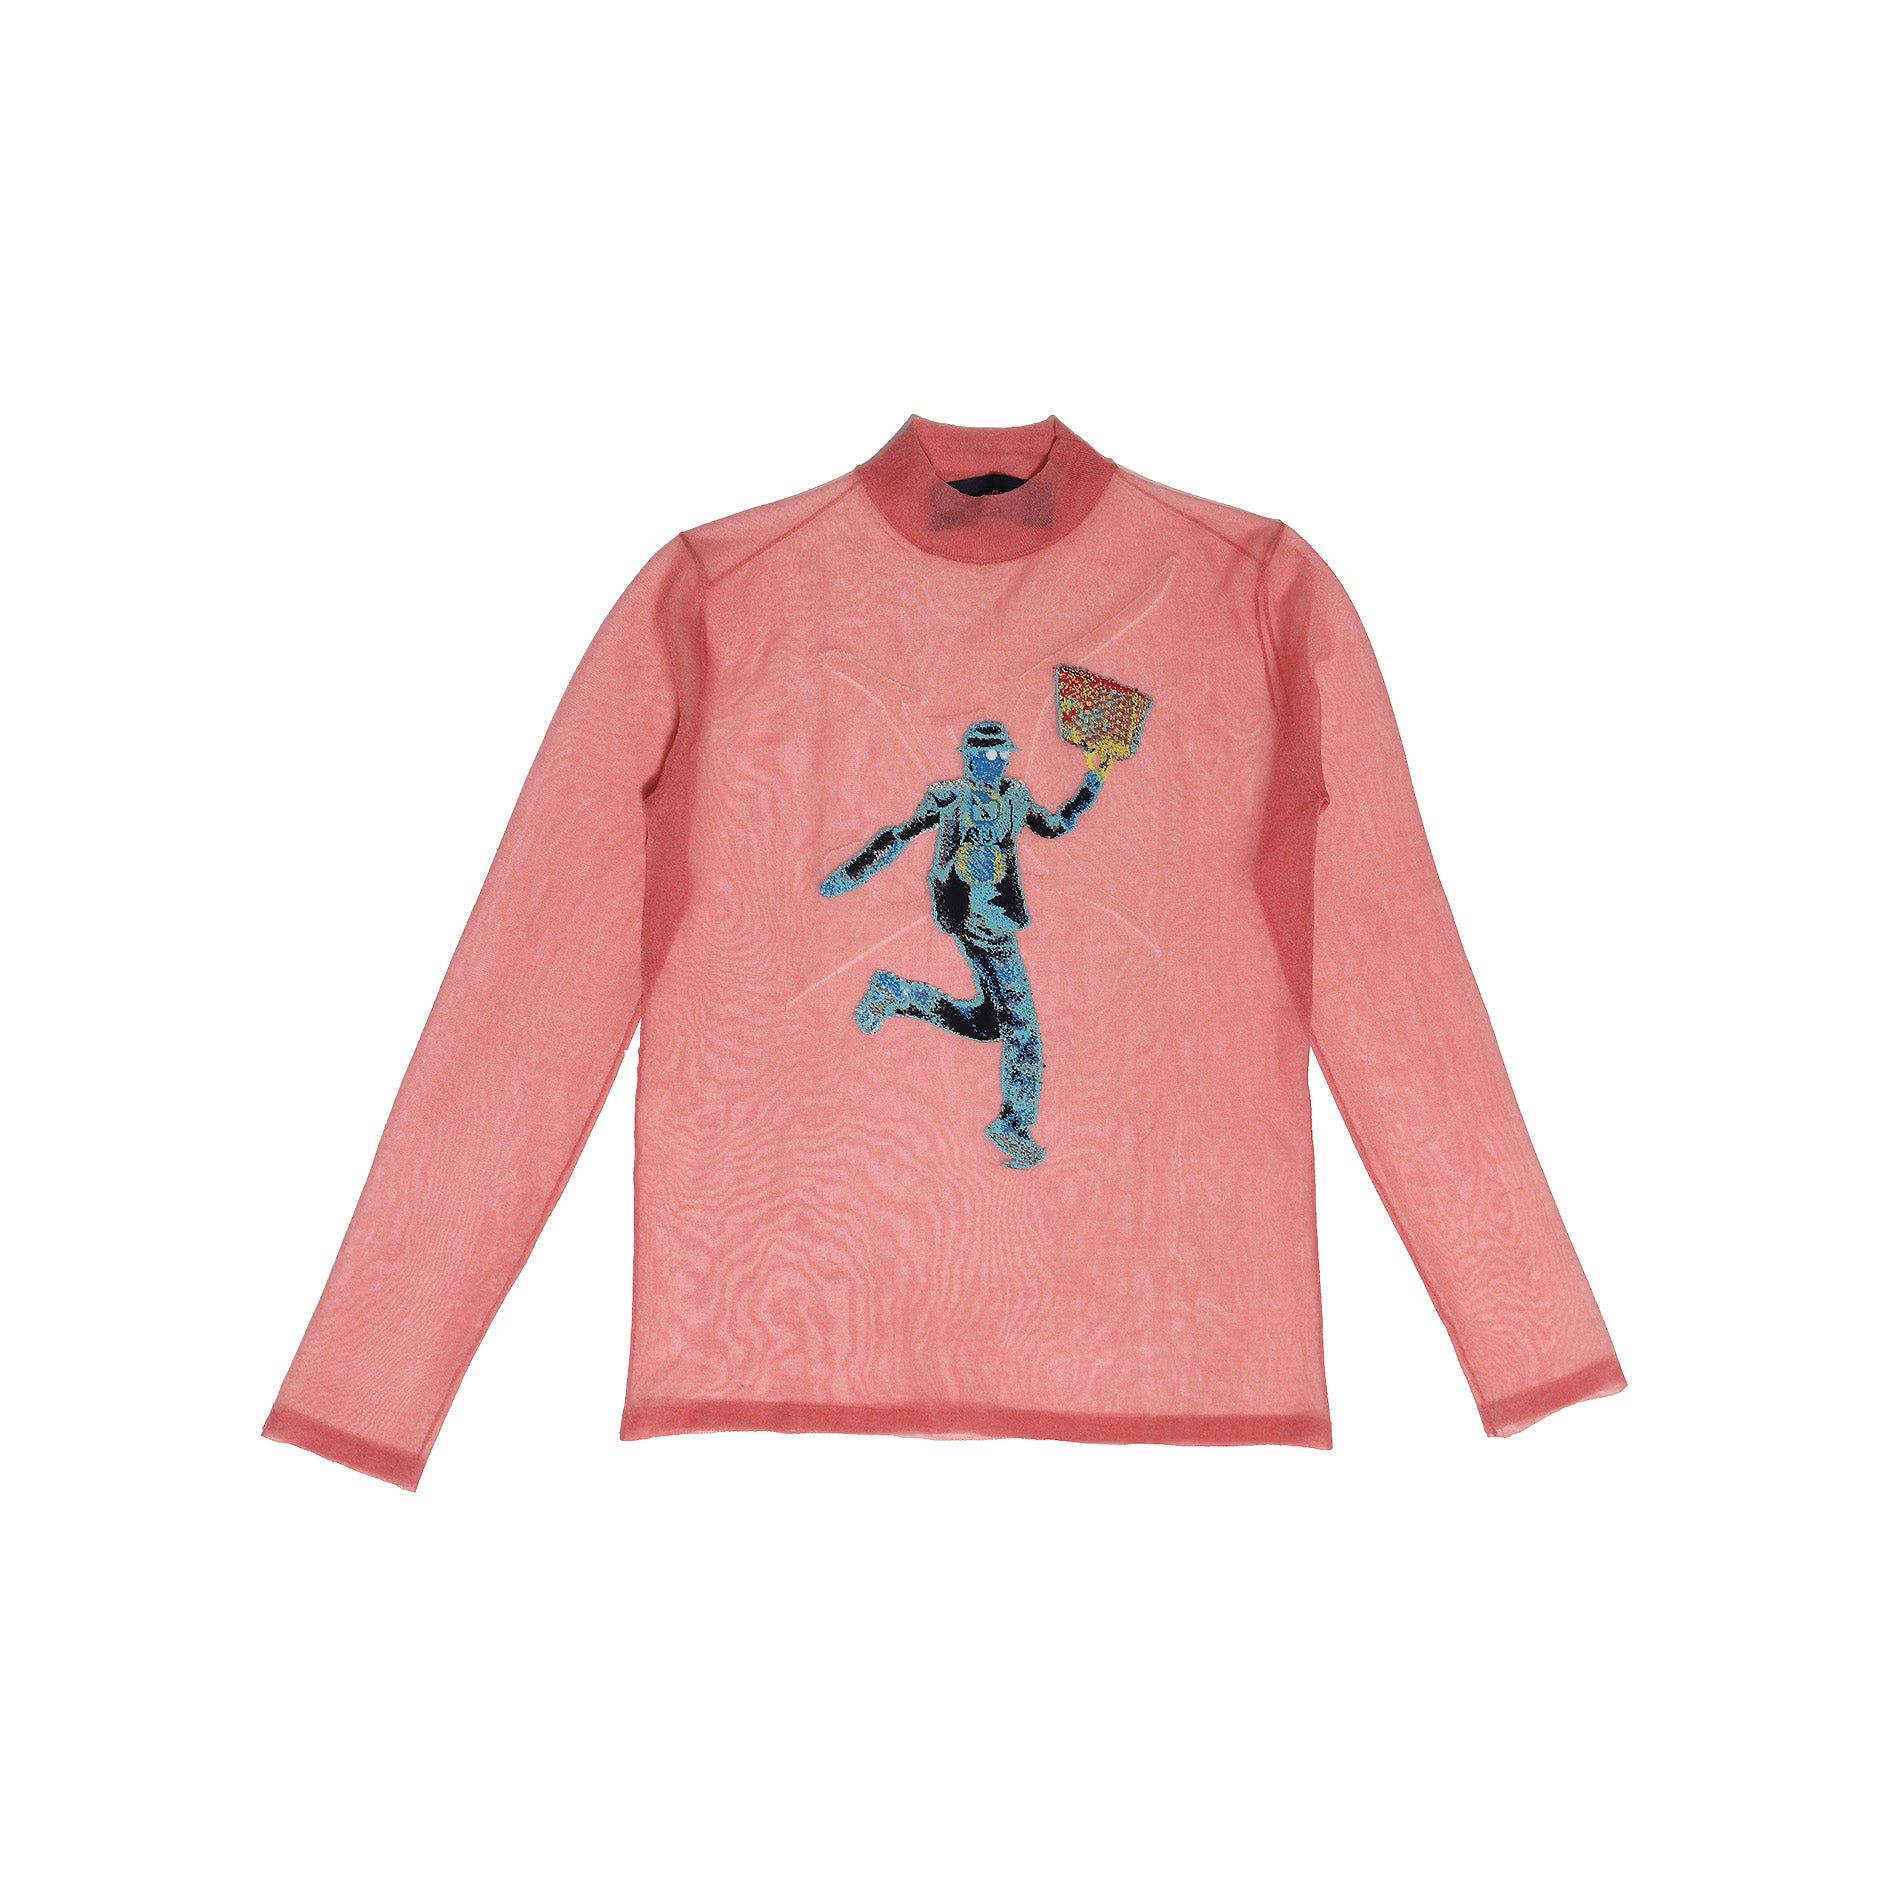 Louis Vuitton SS19 1 of 1 Pink Sheer Embroidery Longsleeve